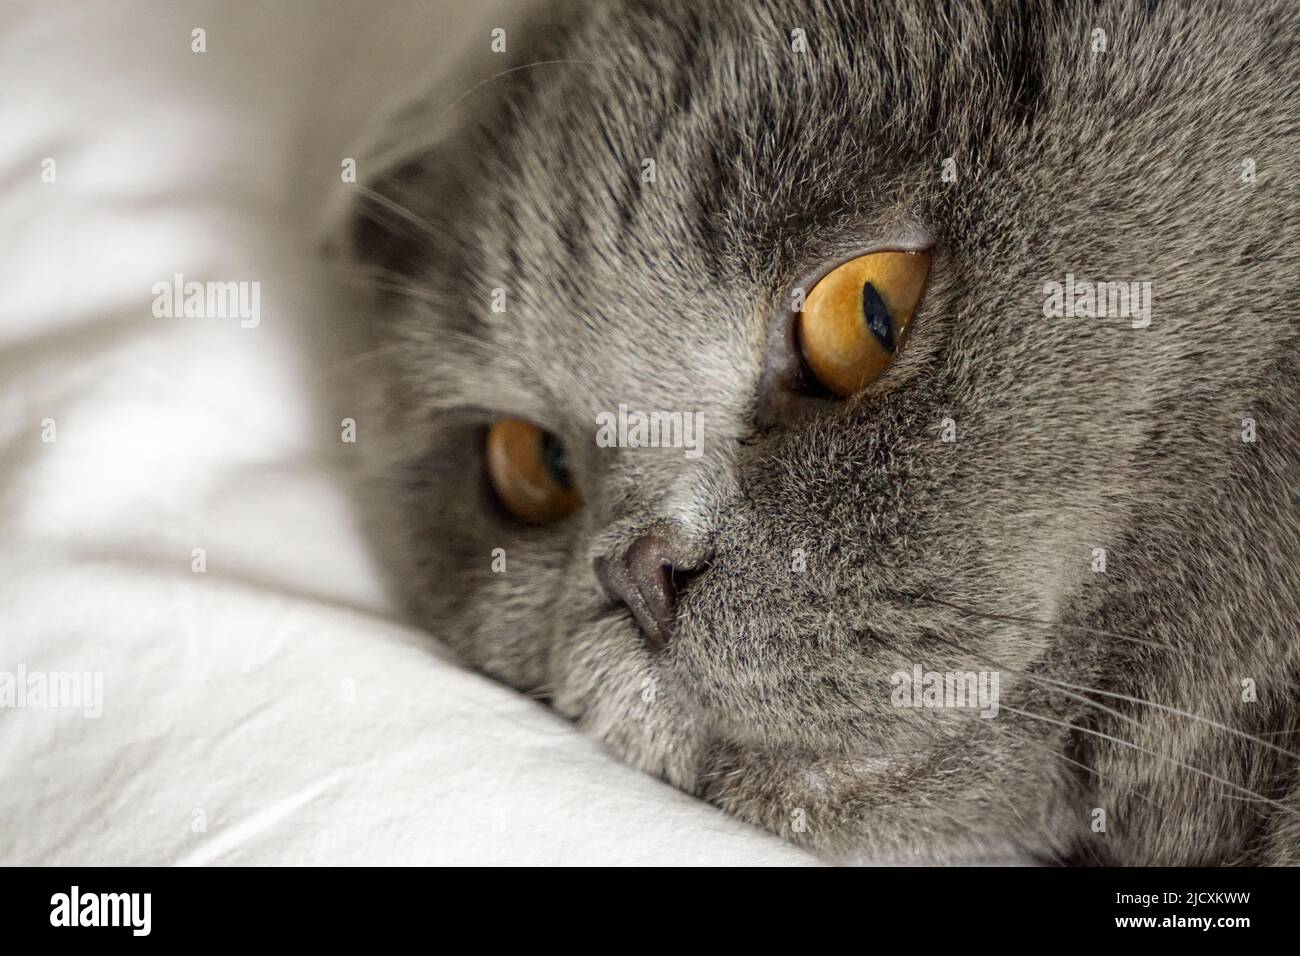 Scottish fold cat looking at close up view Stock Photo